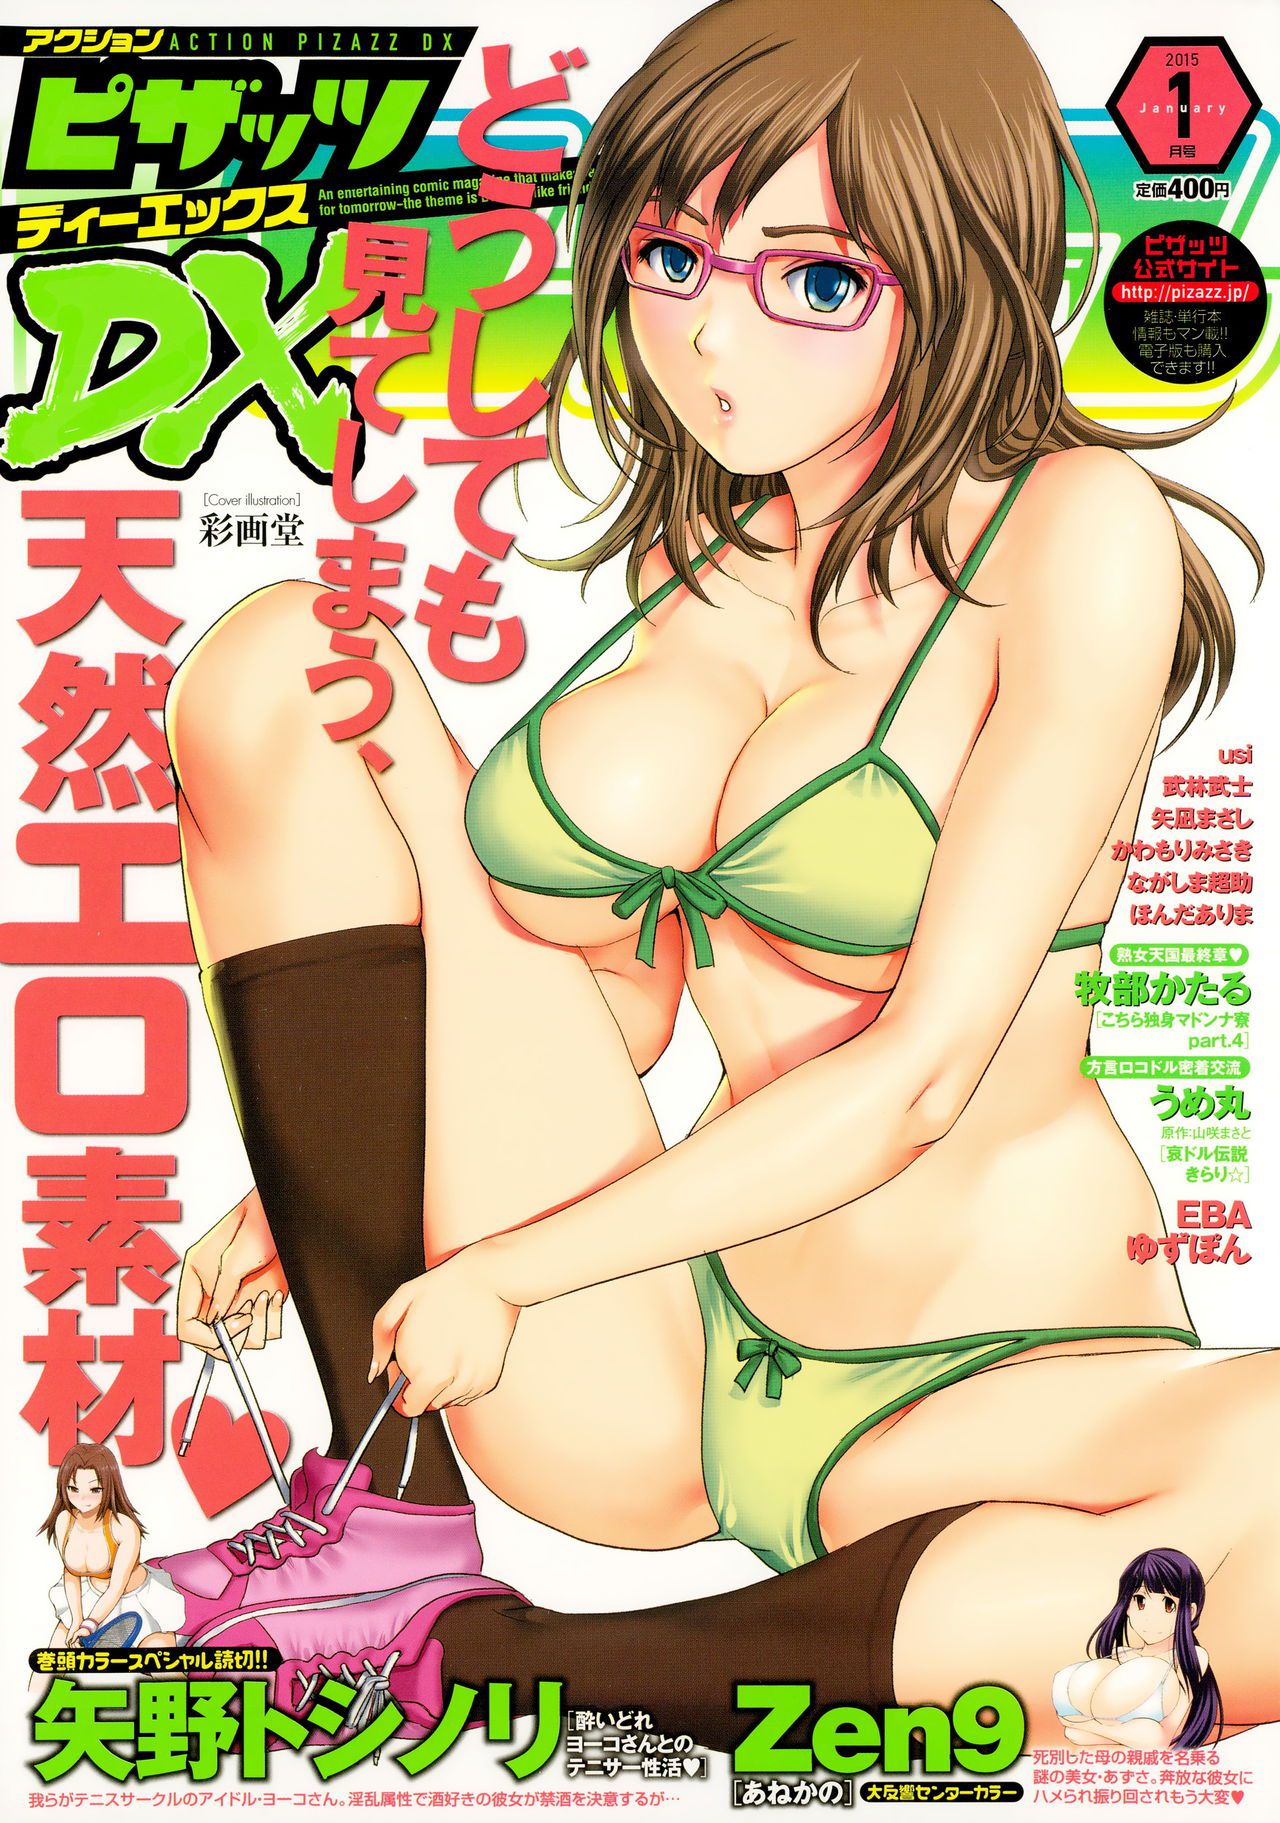 [Saigado] Cover Illustrations [彩画堂] Cover Illustrations 207